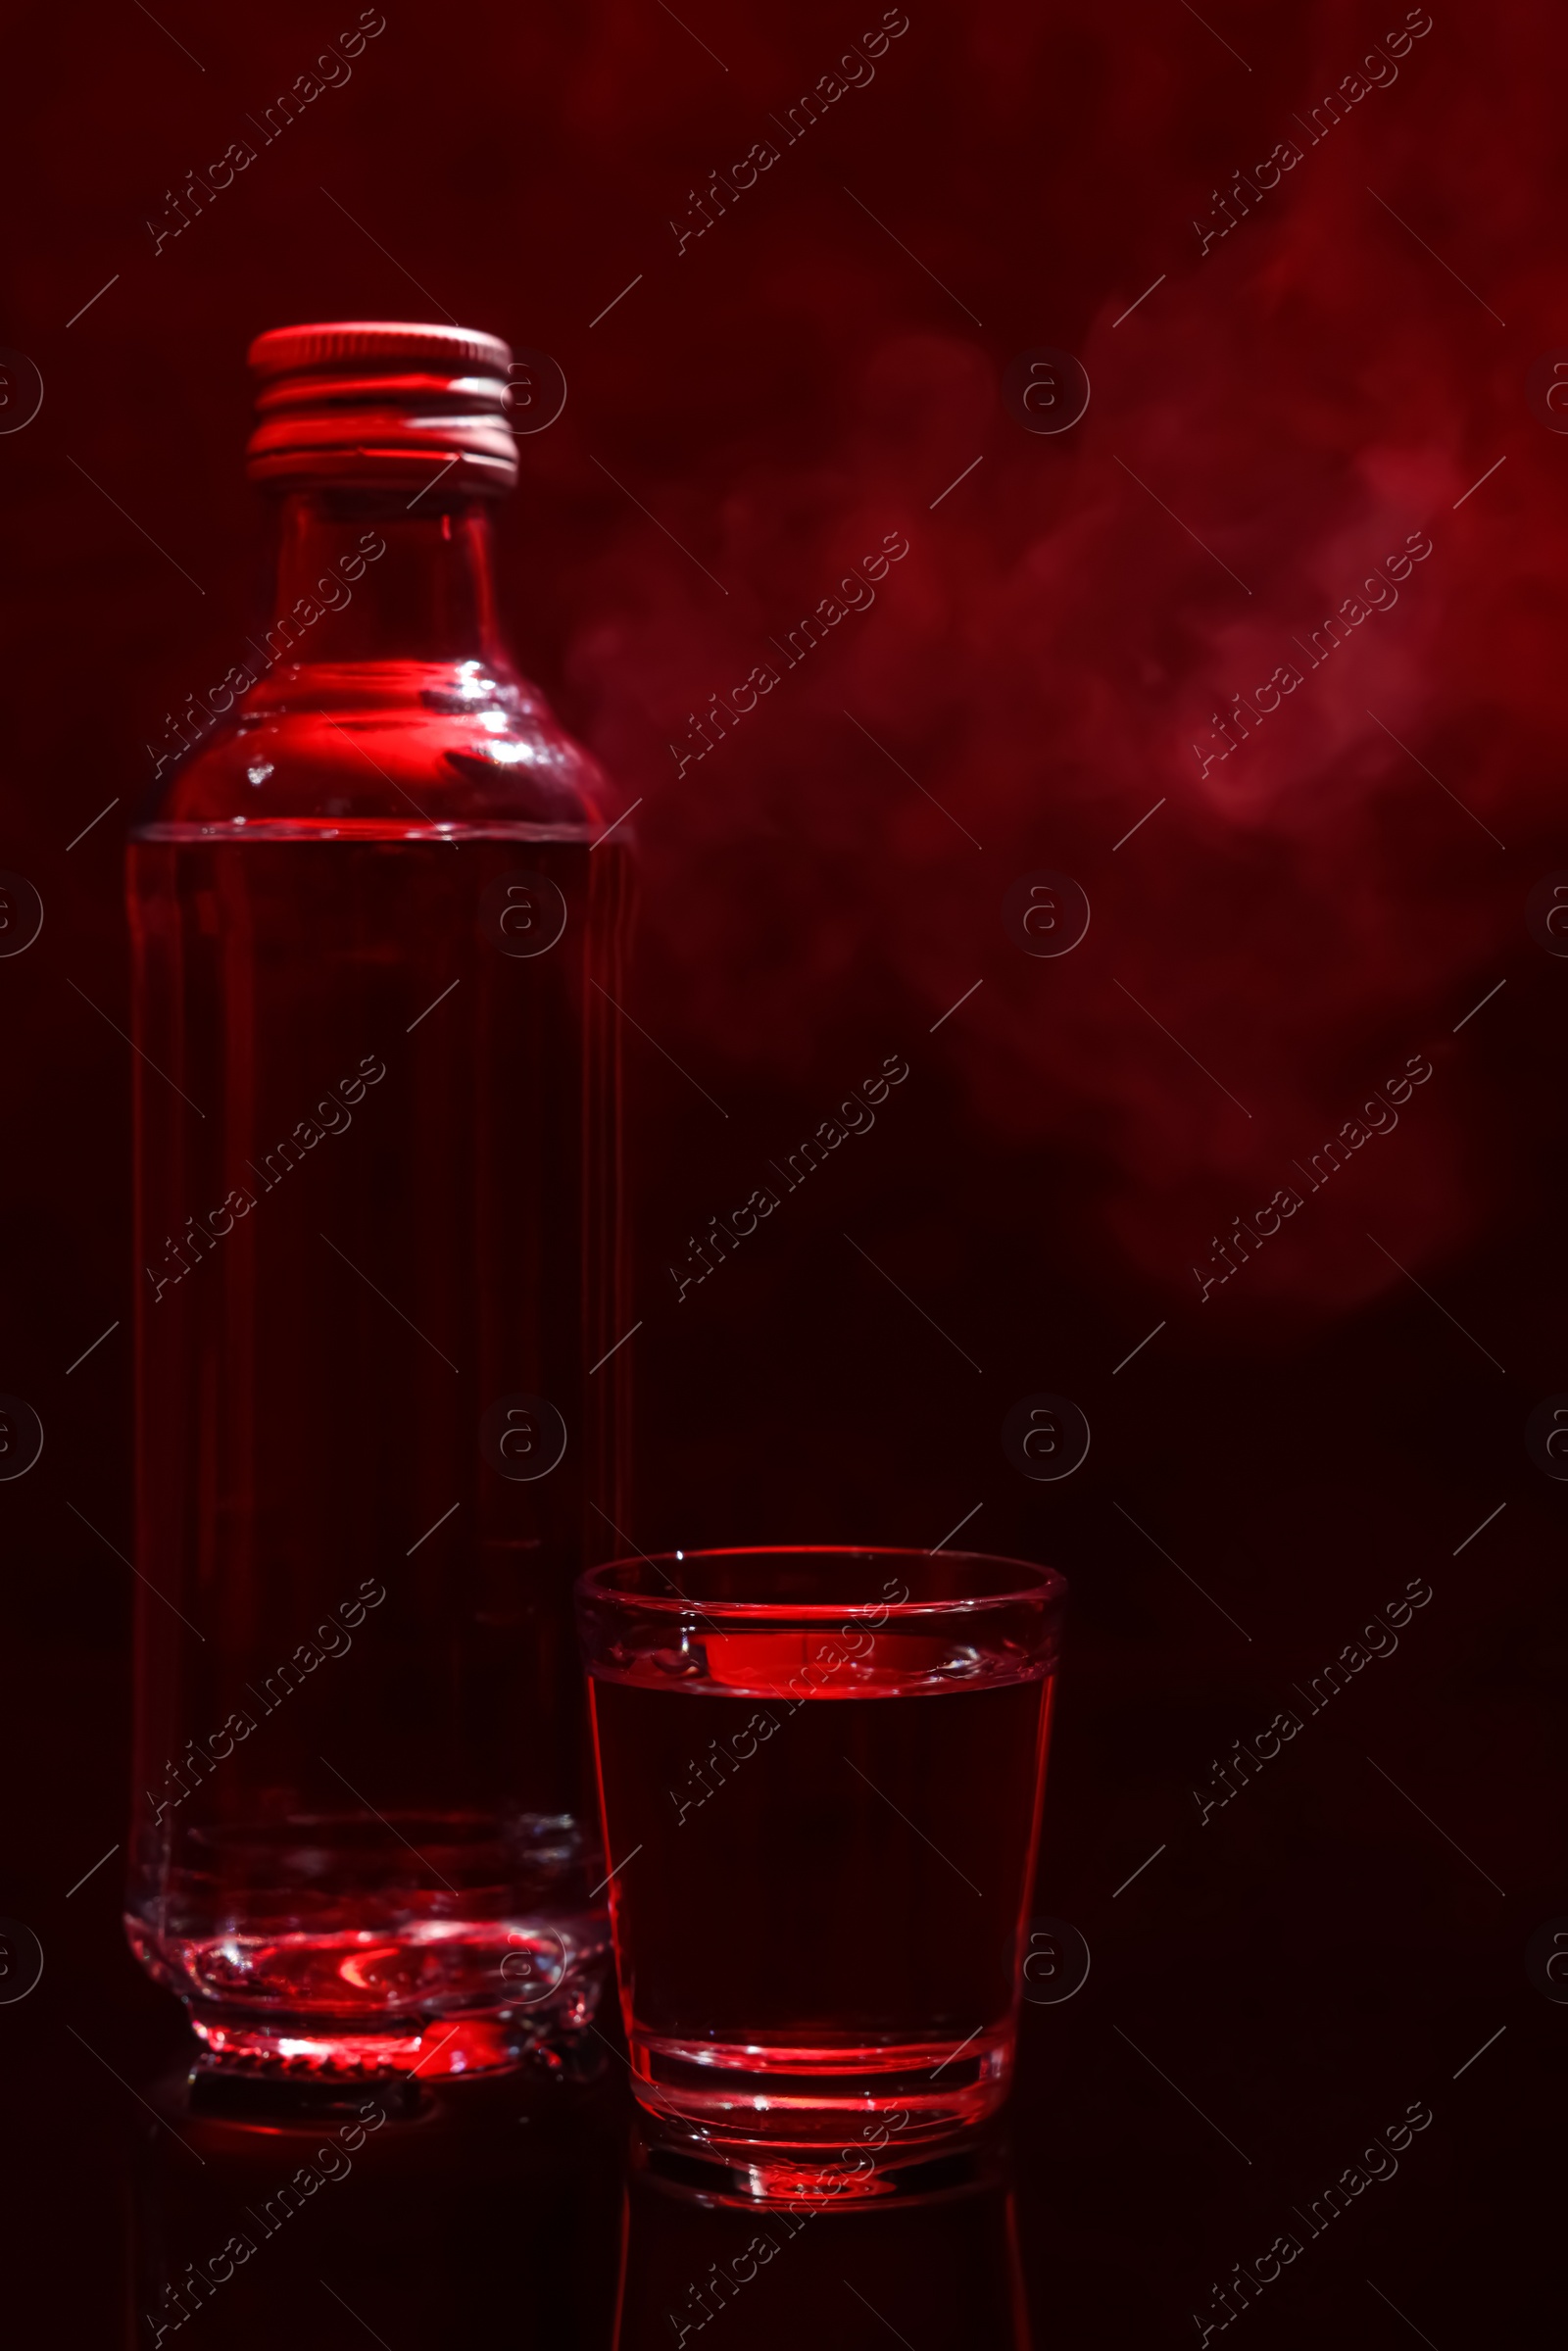 Photo of Bottle and glass with vodka on table against red background